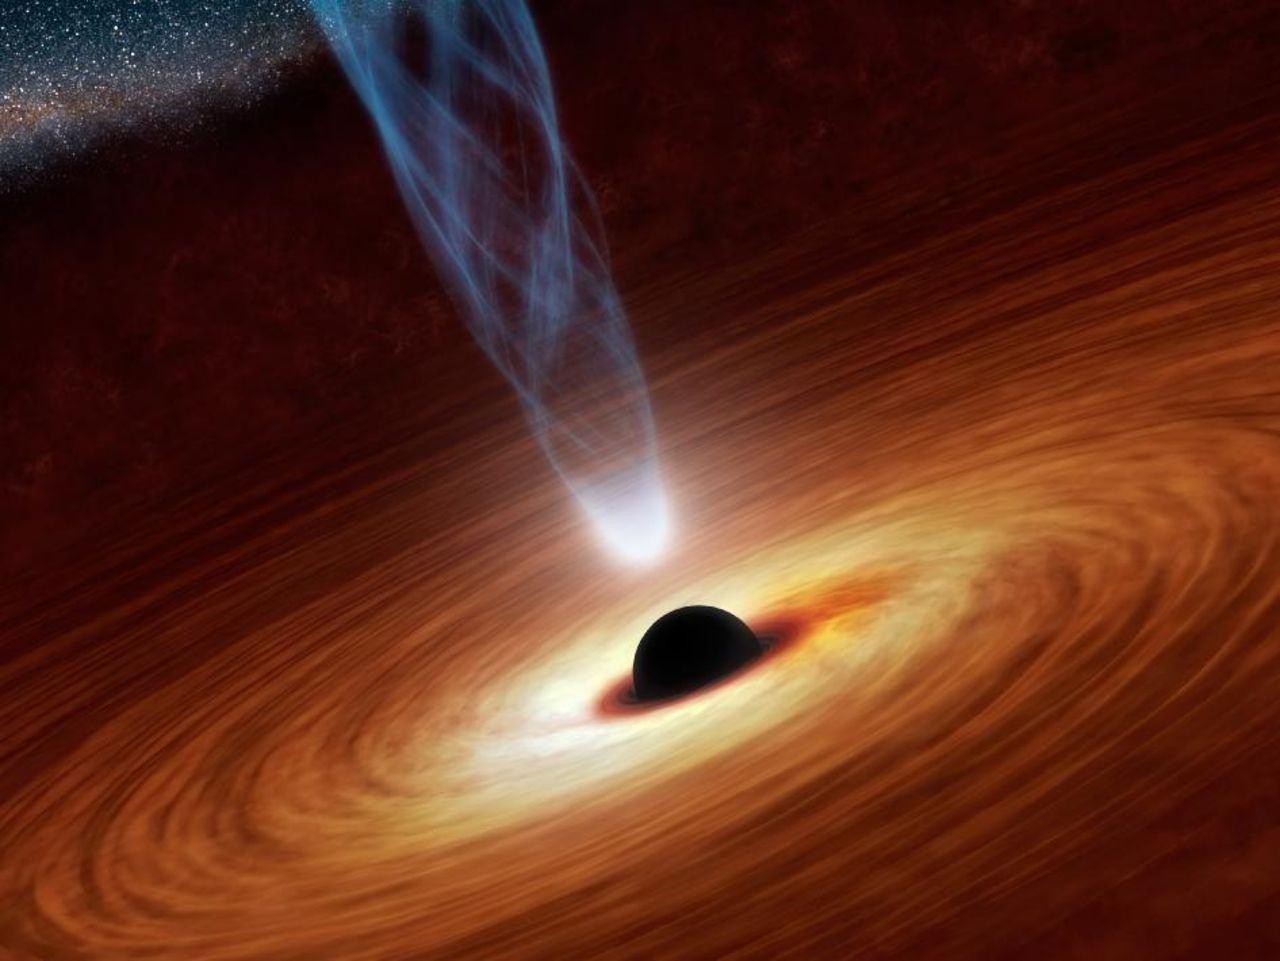 Einstein's ideas about gravity have led to predictions of black holes, which occur when the mass of an entire star is compressed into a tiny volume.